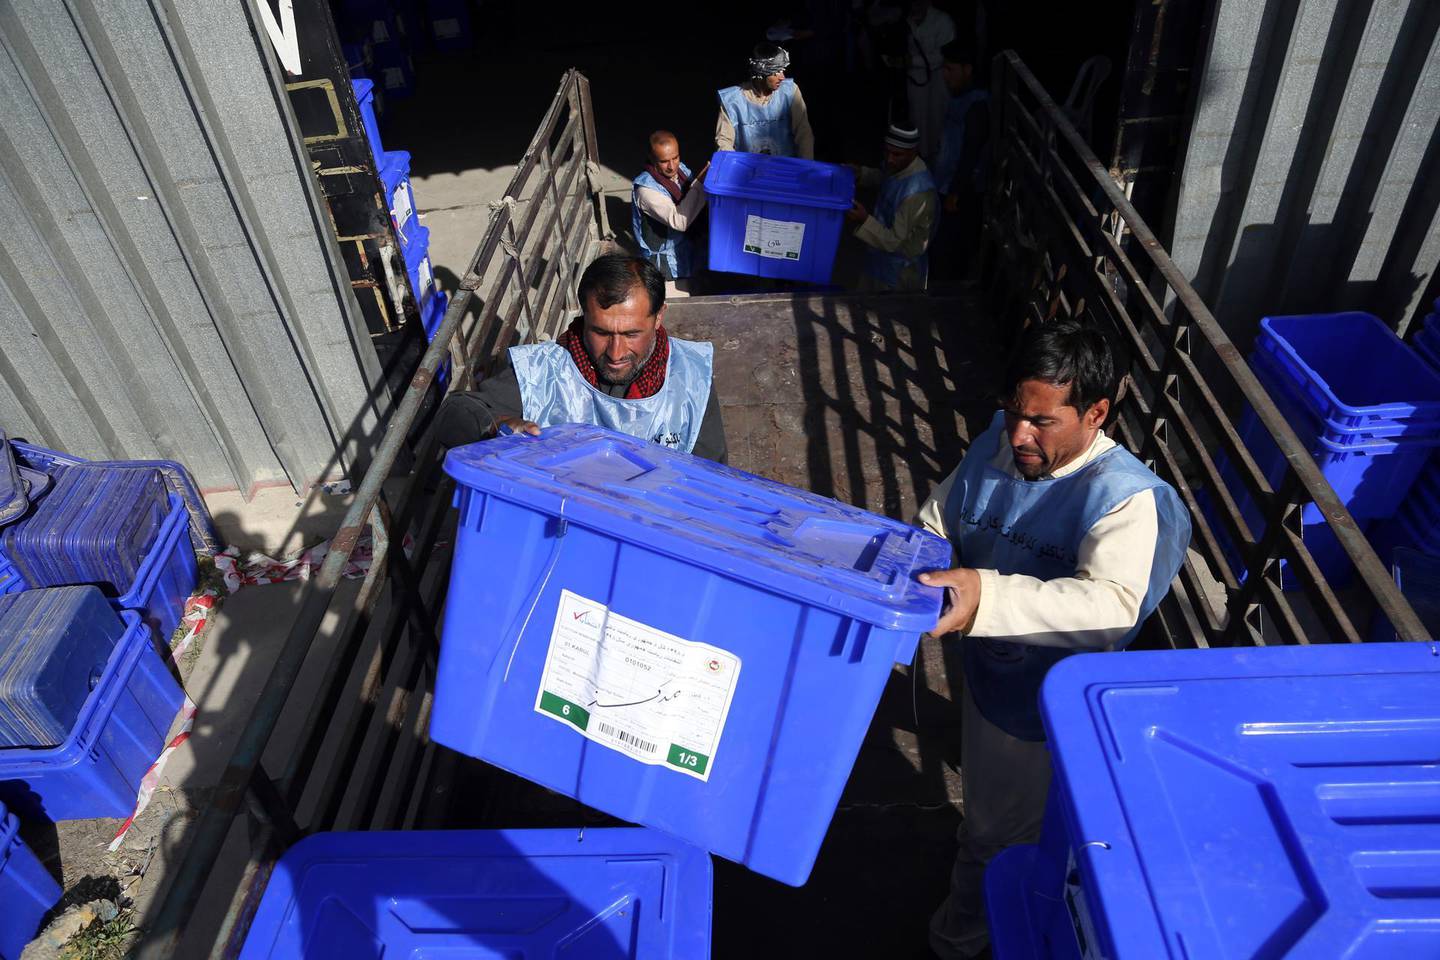 In this Monday, Sept. 23, 2019 photo, Afghan election workers load ballot boxes and other election materials on a truck for distribution at the Independent Election Commission compound, in Kabul, Afghanistan. Millions of Afghans are expected to go to the polls on Saturday to elect a new president, despite an upsurge of violence in the weeks since the collapse of a U.S.-Taliban deal to end Americaâ€™s longest war, and the Taliban warning voters to say away from the polls. (AP Photo/Rahmat Gul)